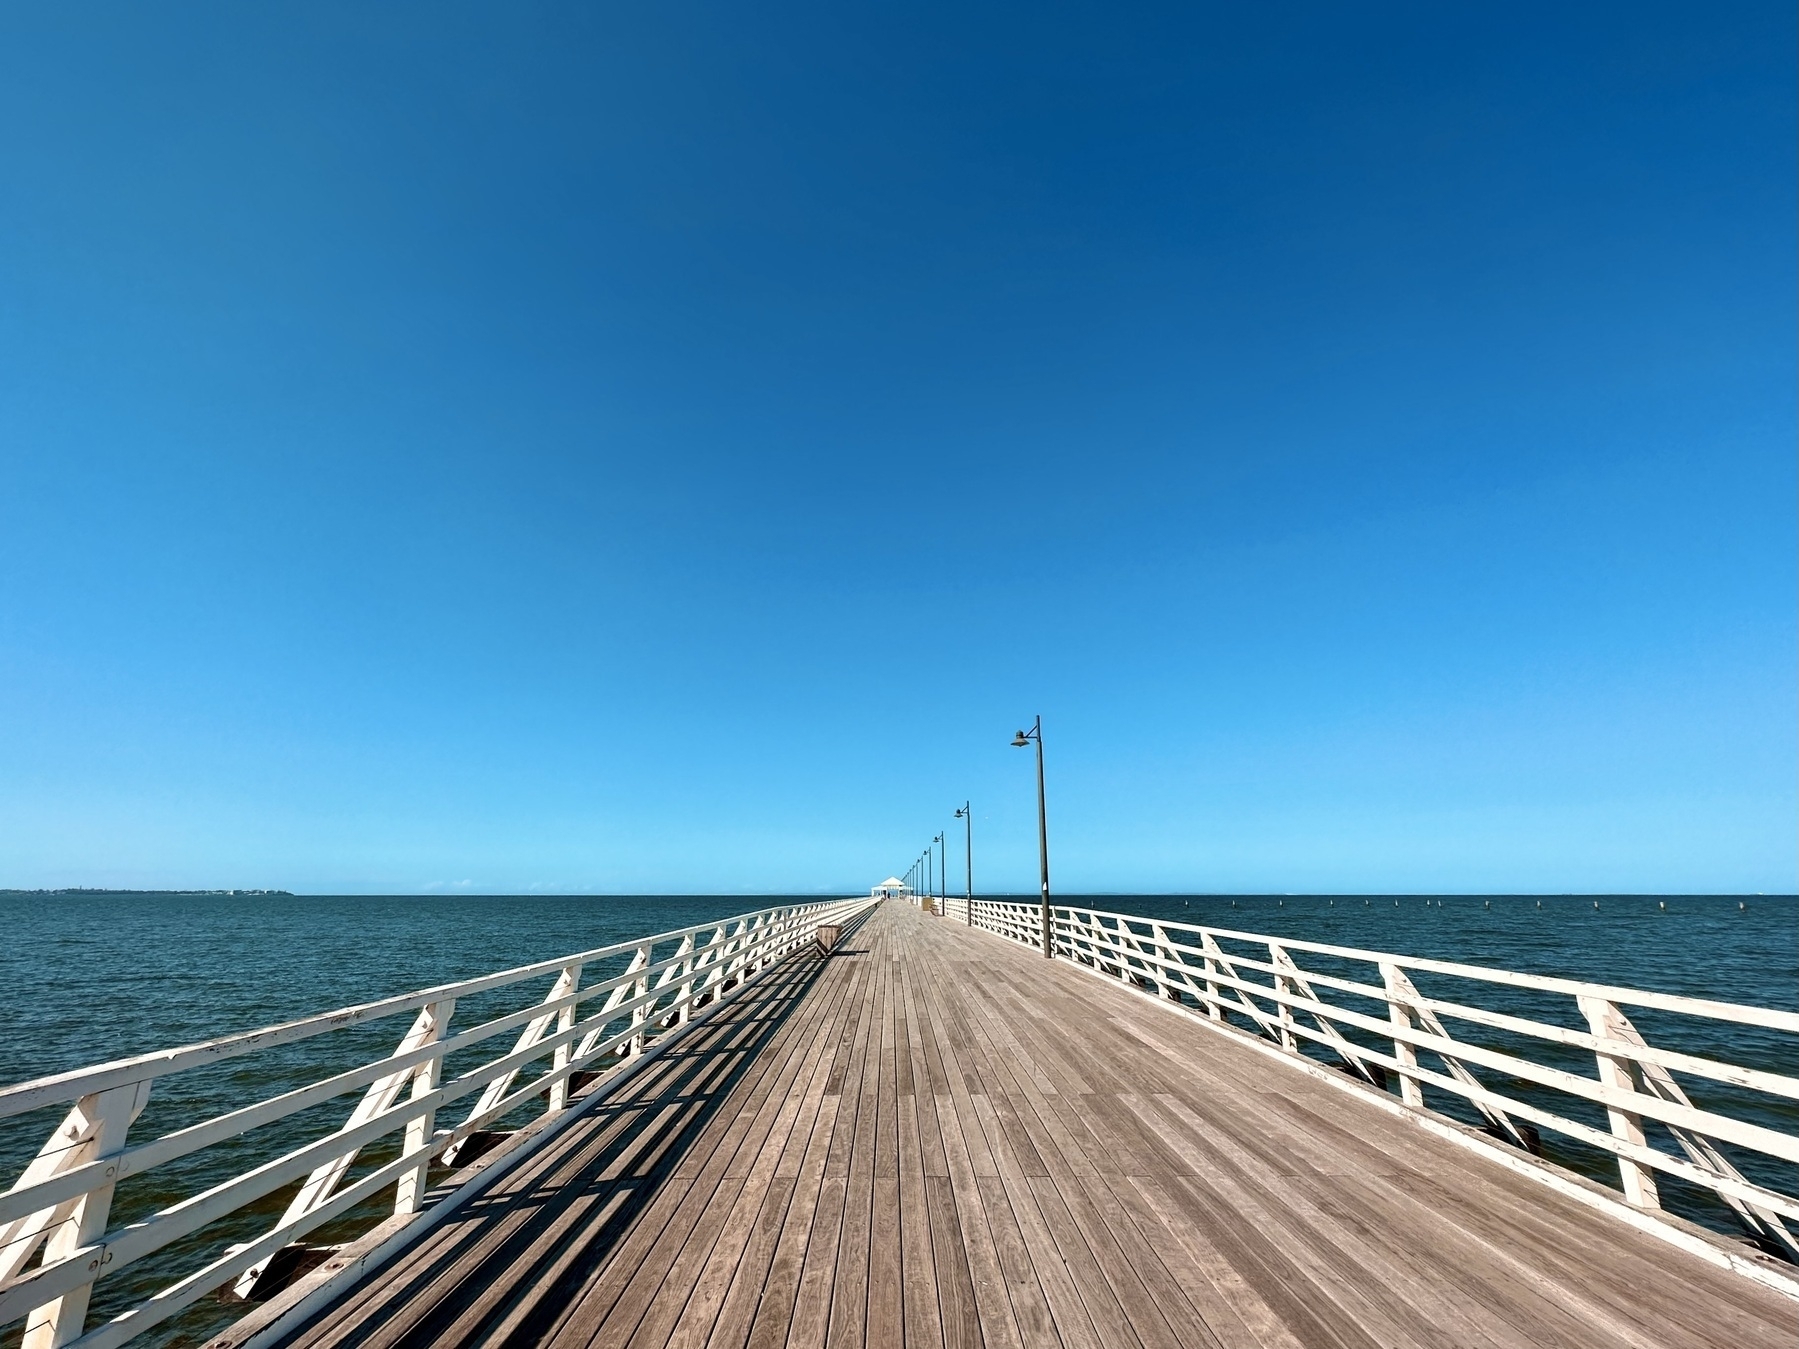 A beautiful clear day, with a bright blue sky. An old wooden pier, with light decking and faded white railings, and lined with old colonial street lamps stretches out toward the horizon, and into the blue green coastal waters. A small gazebo decorating its end sits on the horizon line.